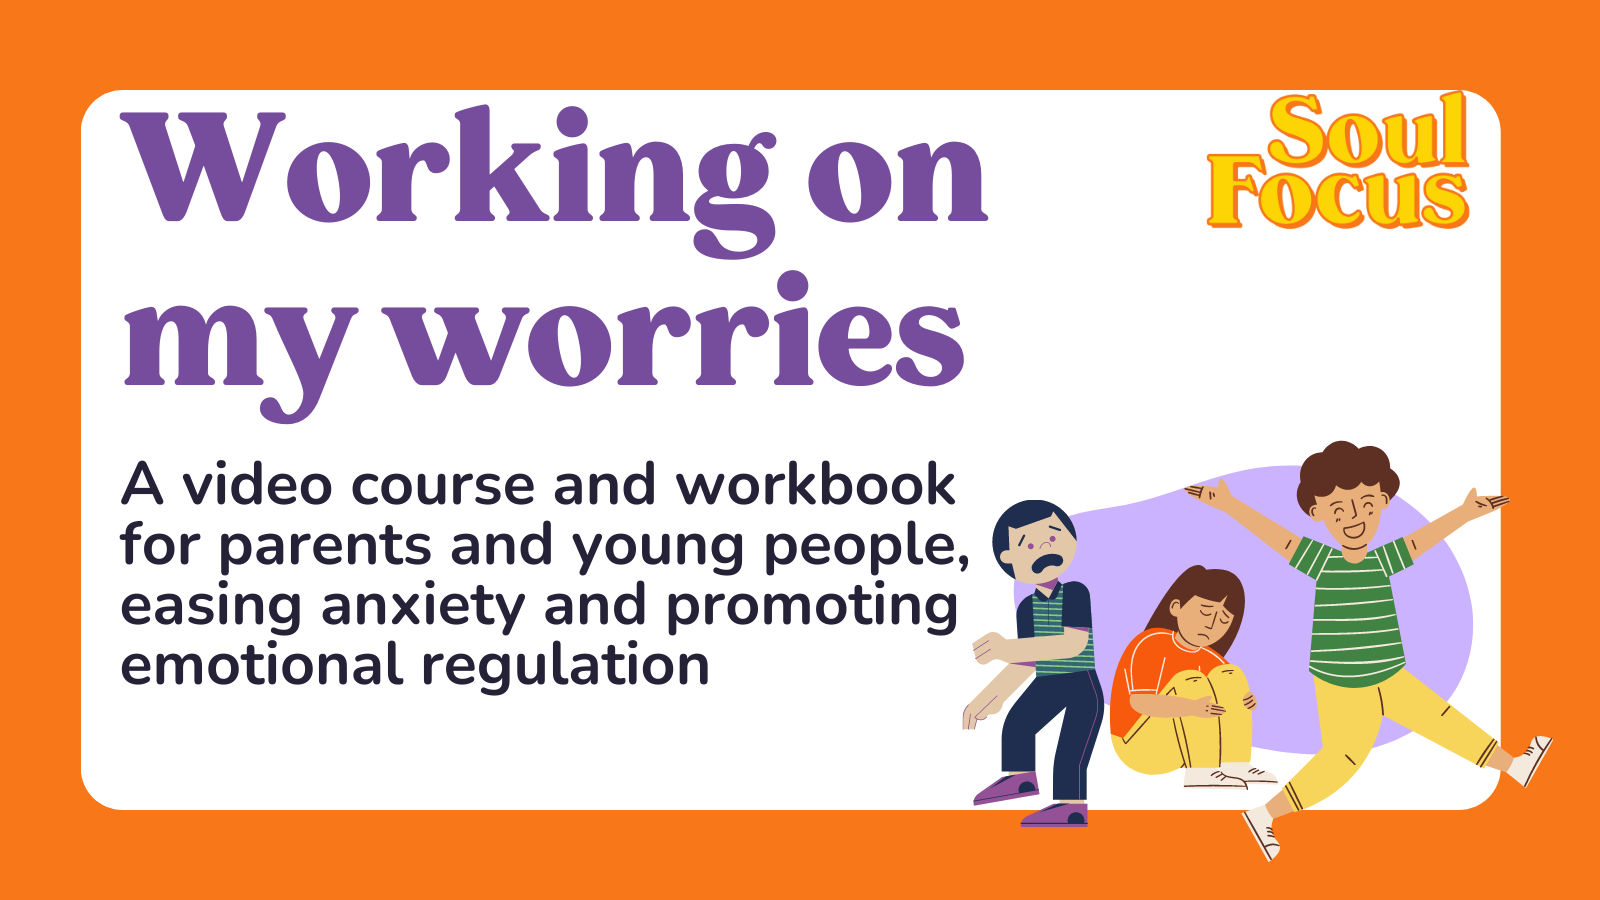 Working on Your Worries - For Parents and Children aged 5-12